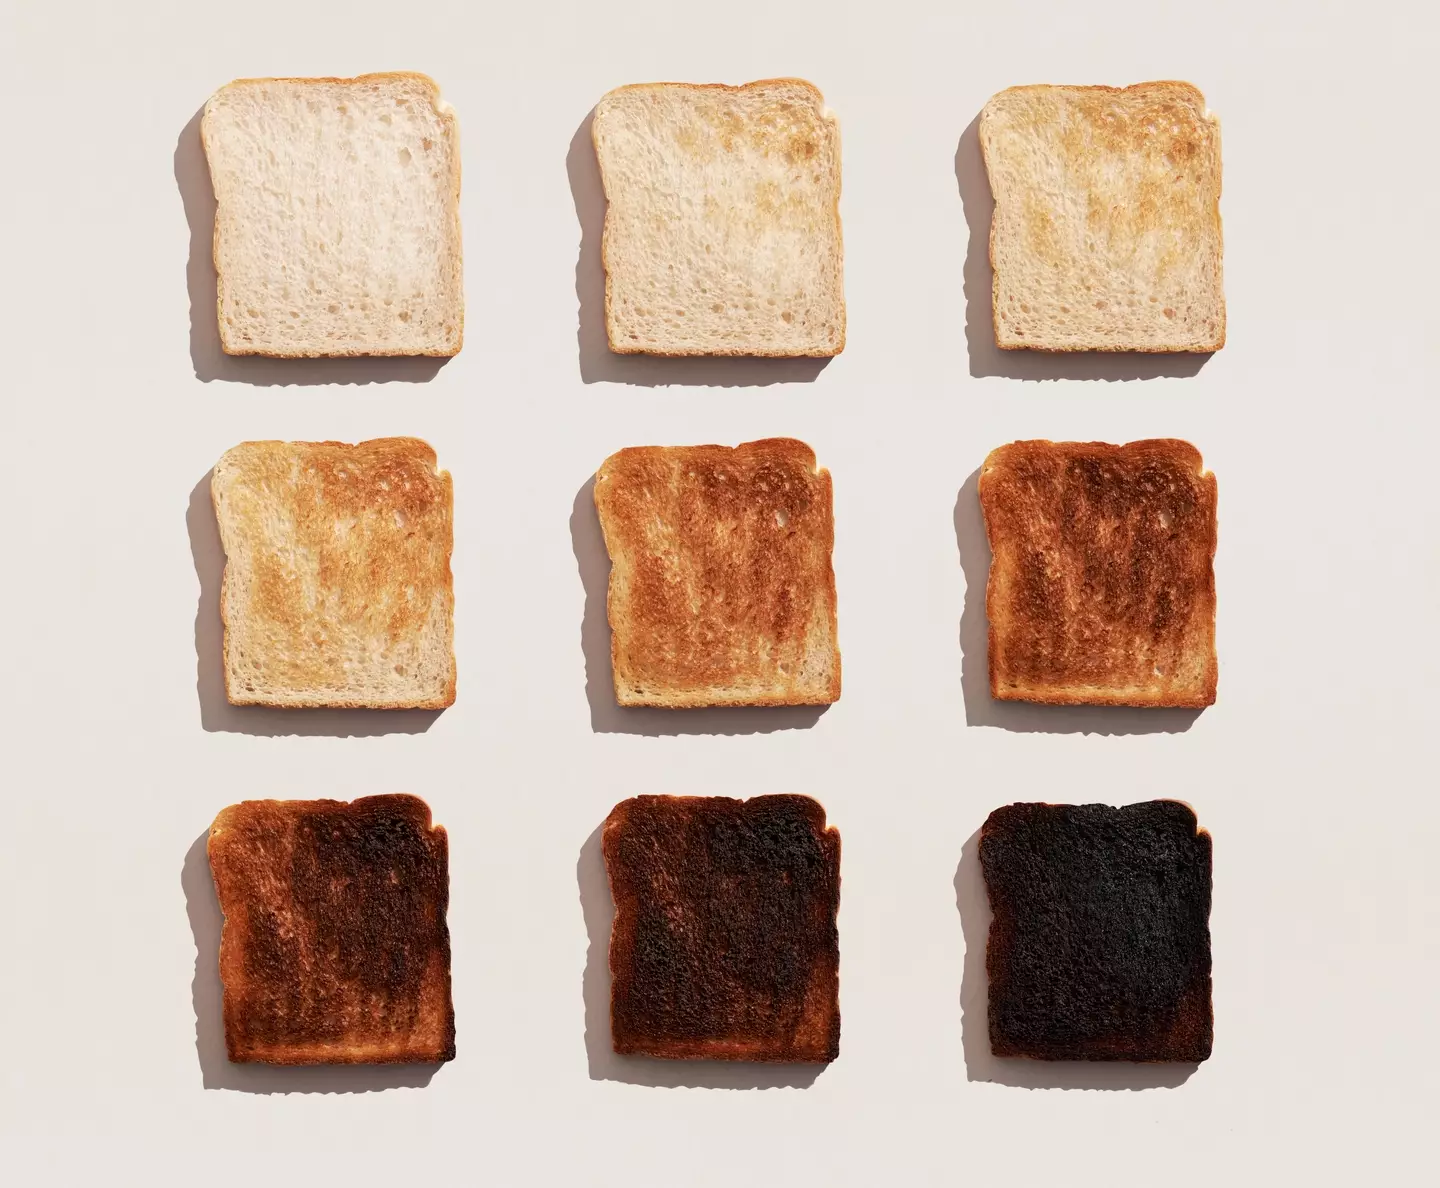 Which toast is yours?